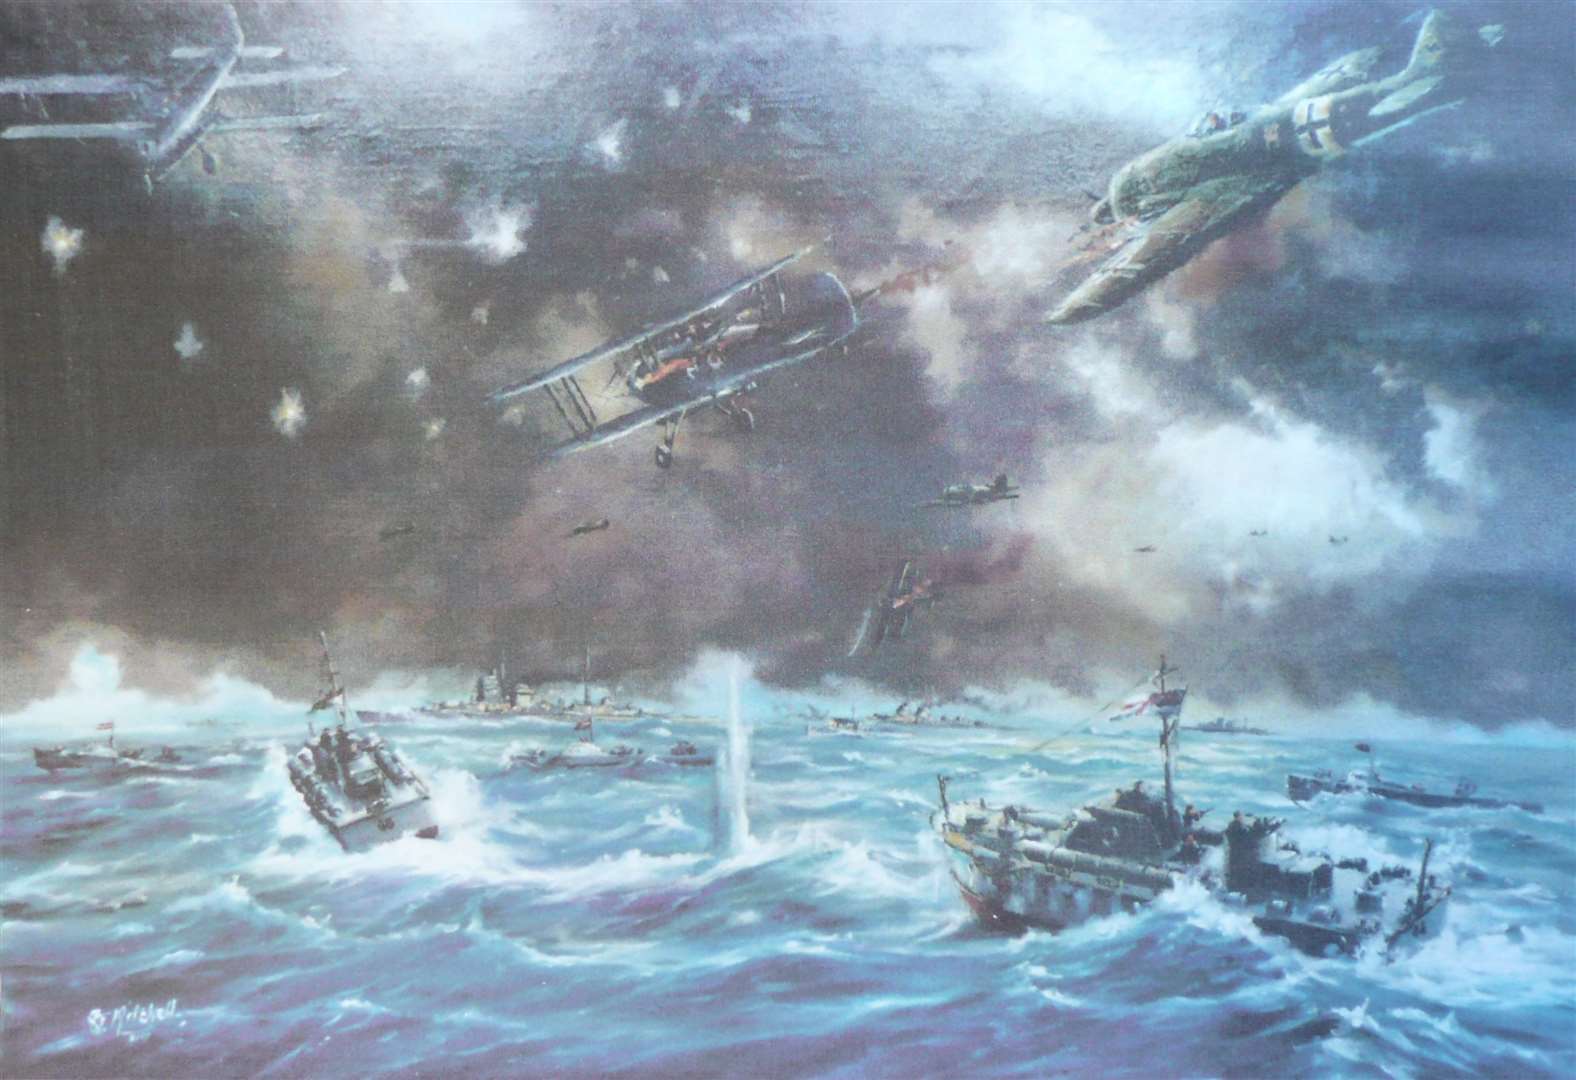 A memorial painting of the 'disastrous' Channel Dash, which saw many lose their lives. Credit: Reg Mitchell, Channel Dash Association